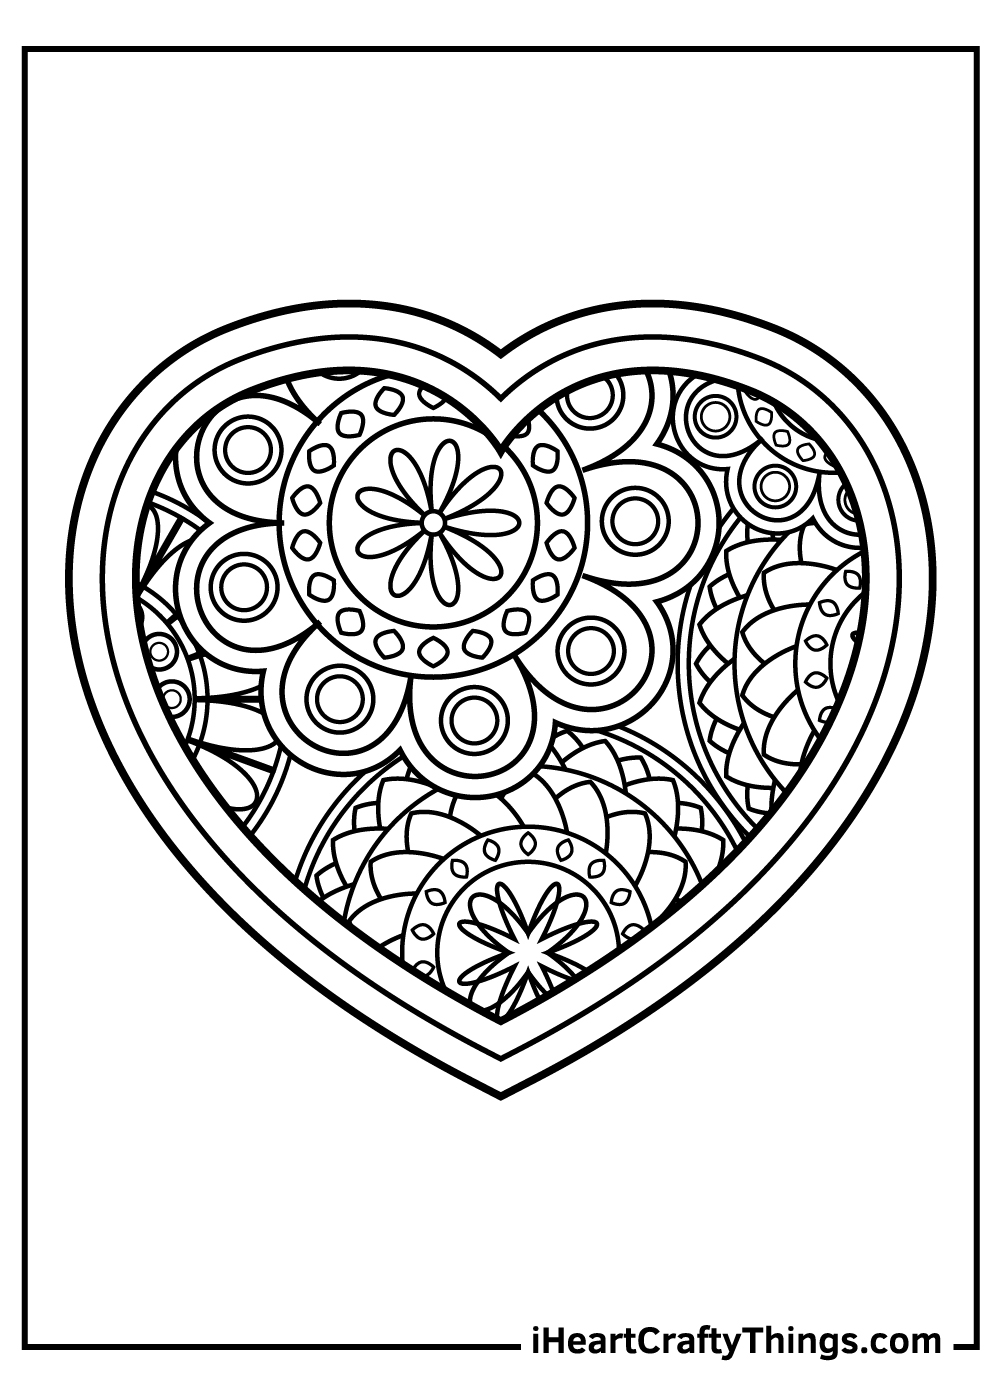 St valentines day coloring pages free printables